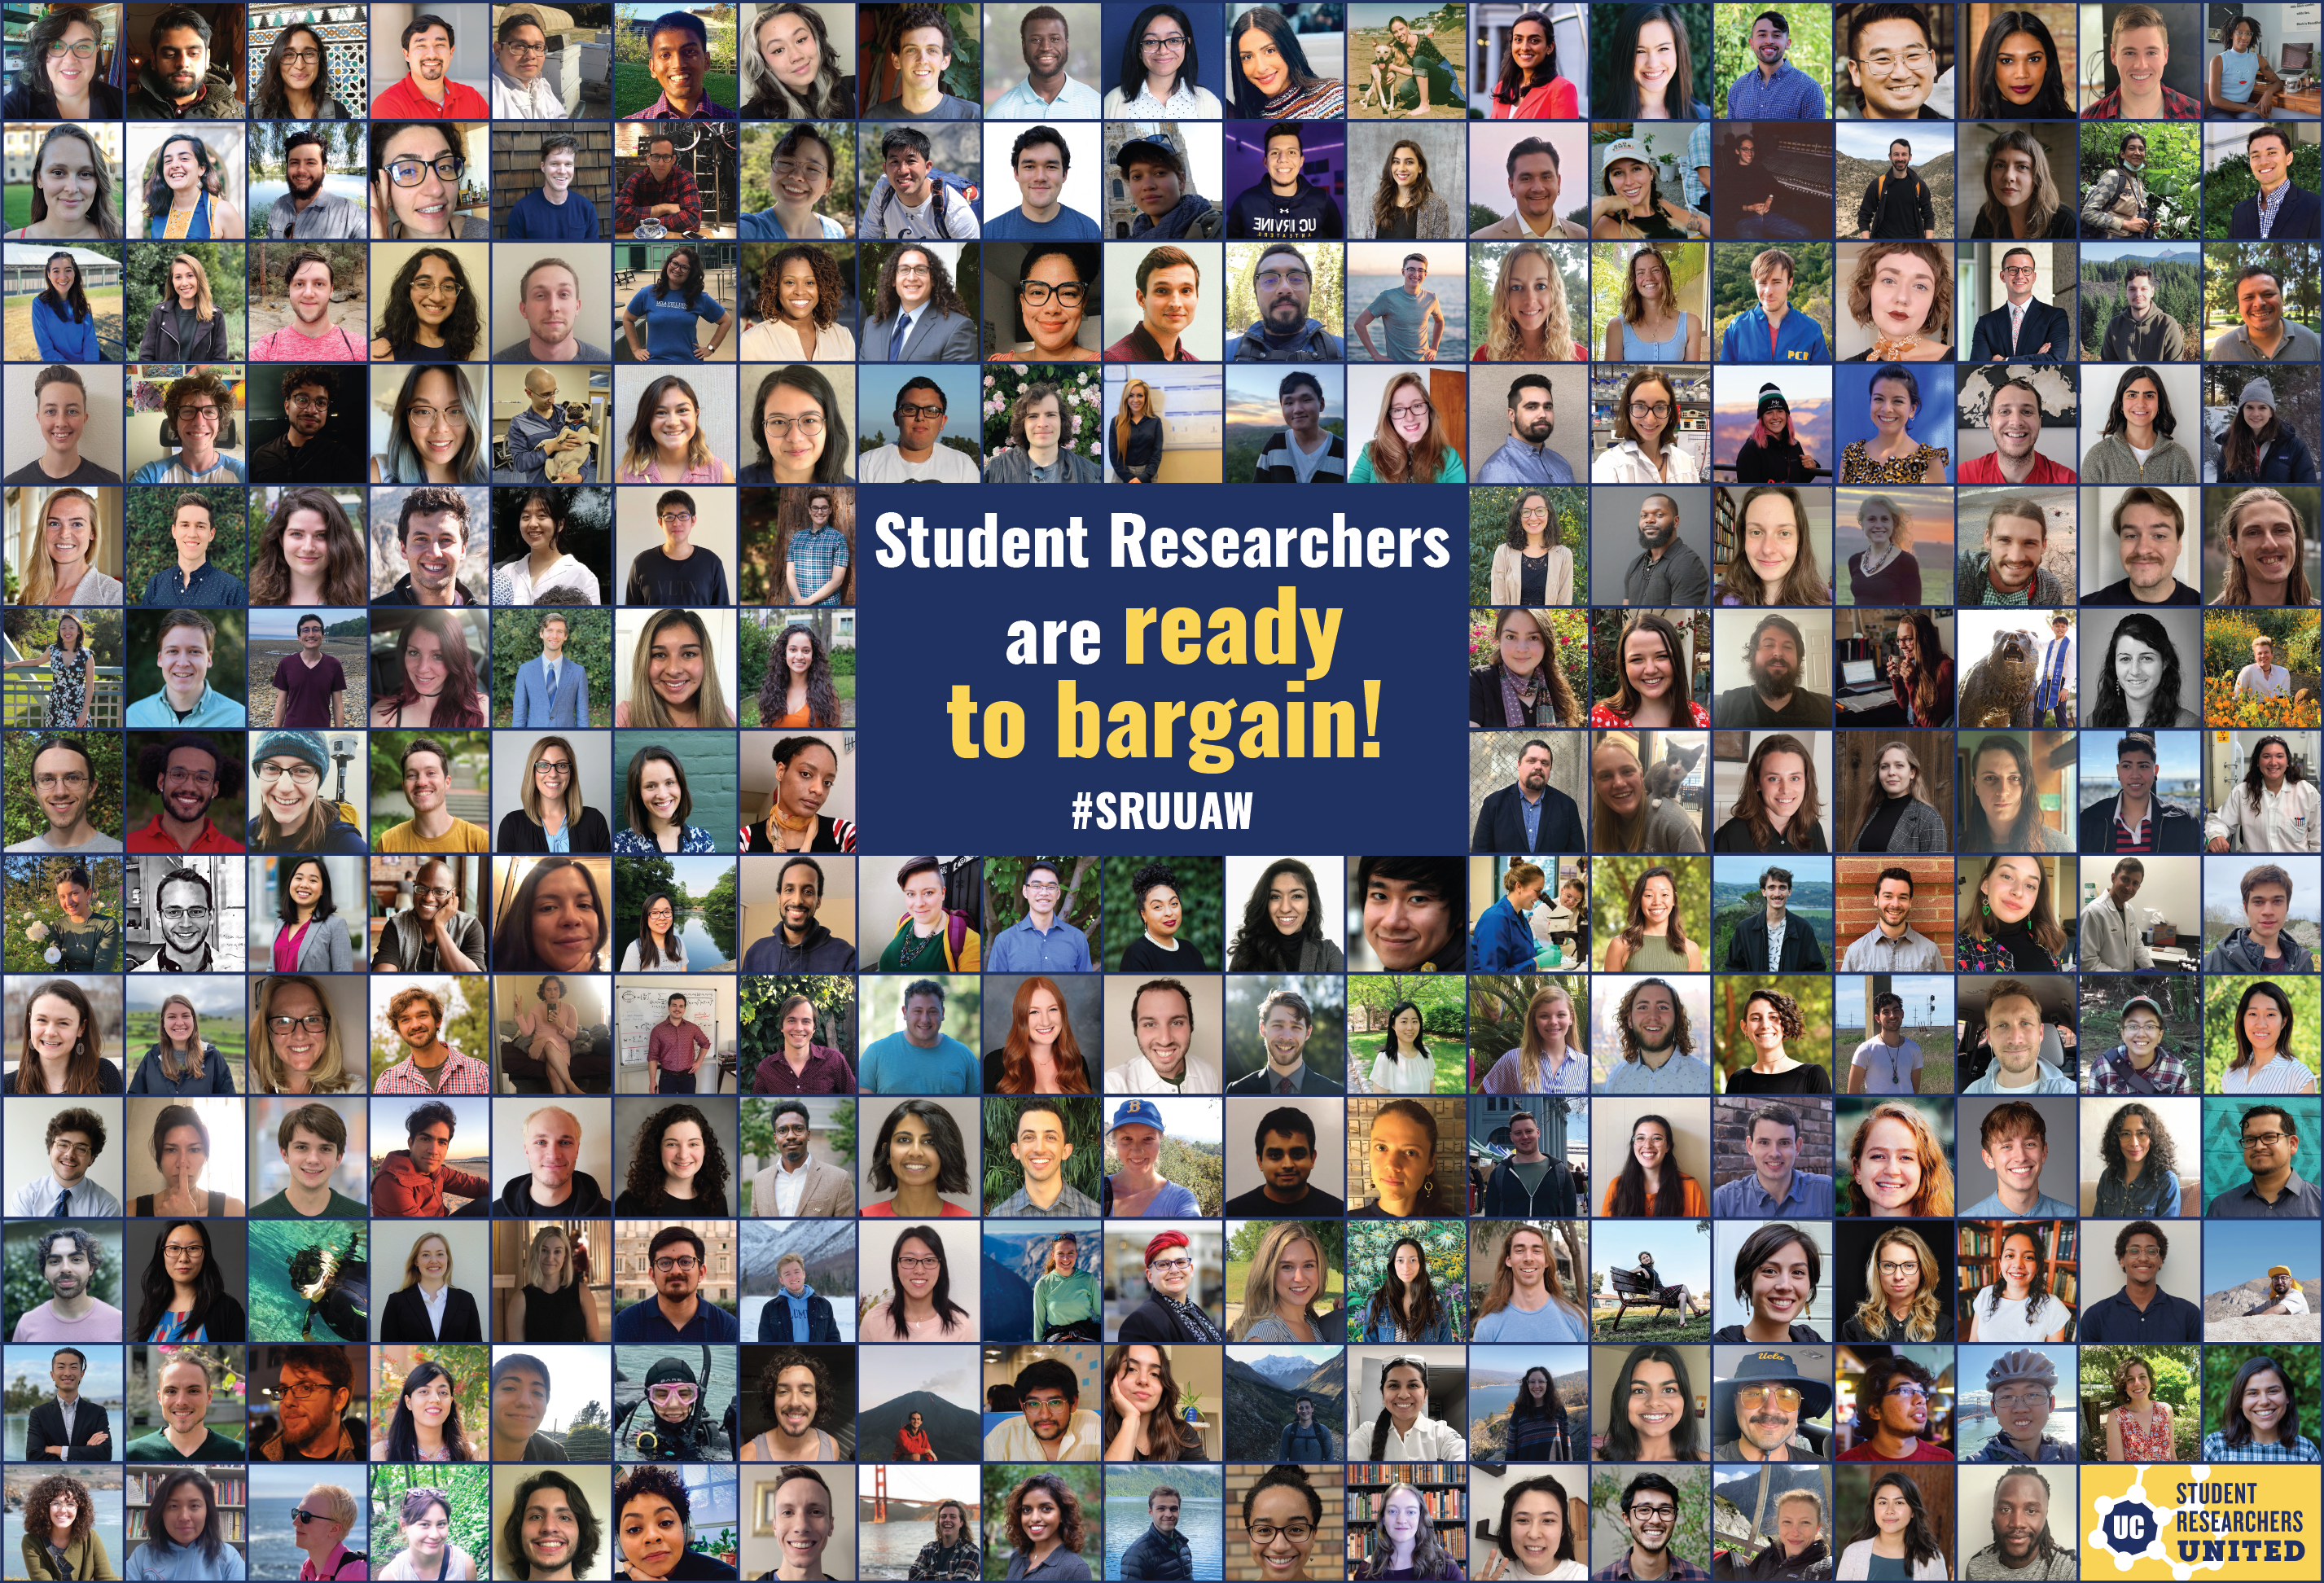 A collage showing hundreds of Student Researchers and the Student Researchers United logo around a block of text that reads, “Student Researchers are ready to bargain! #SRUUAW”.